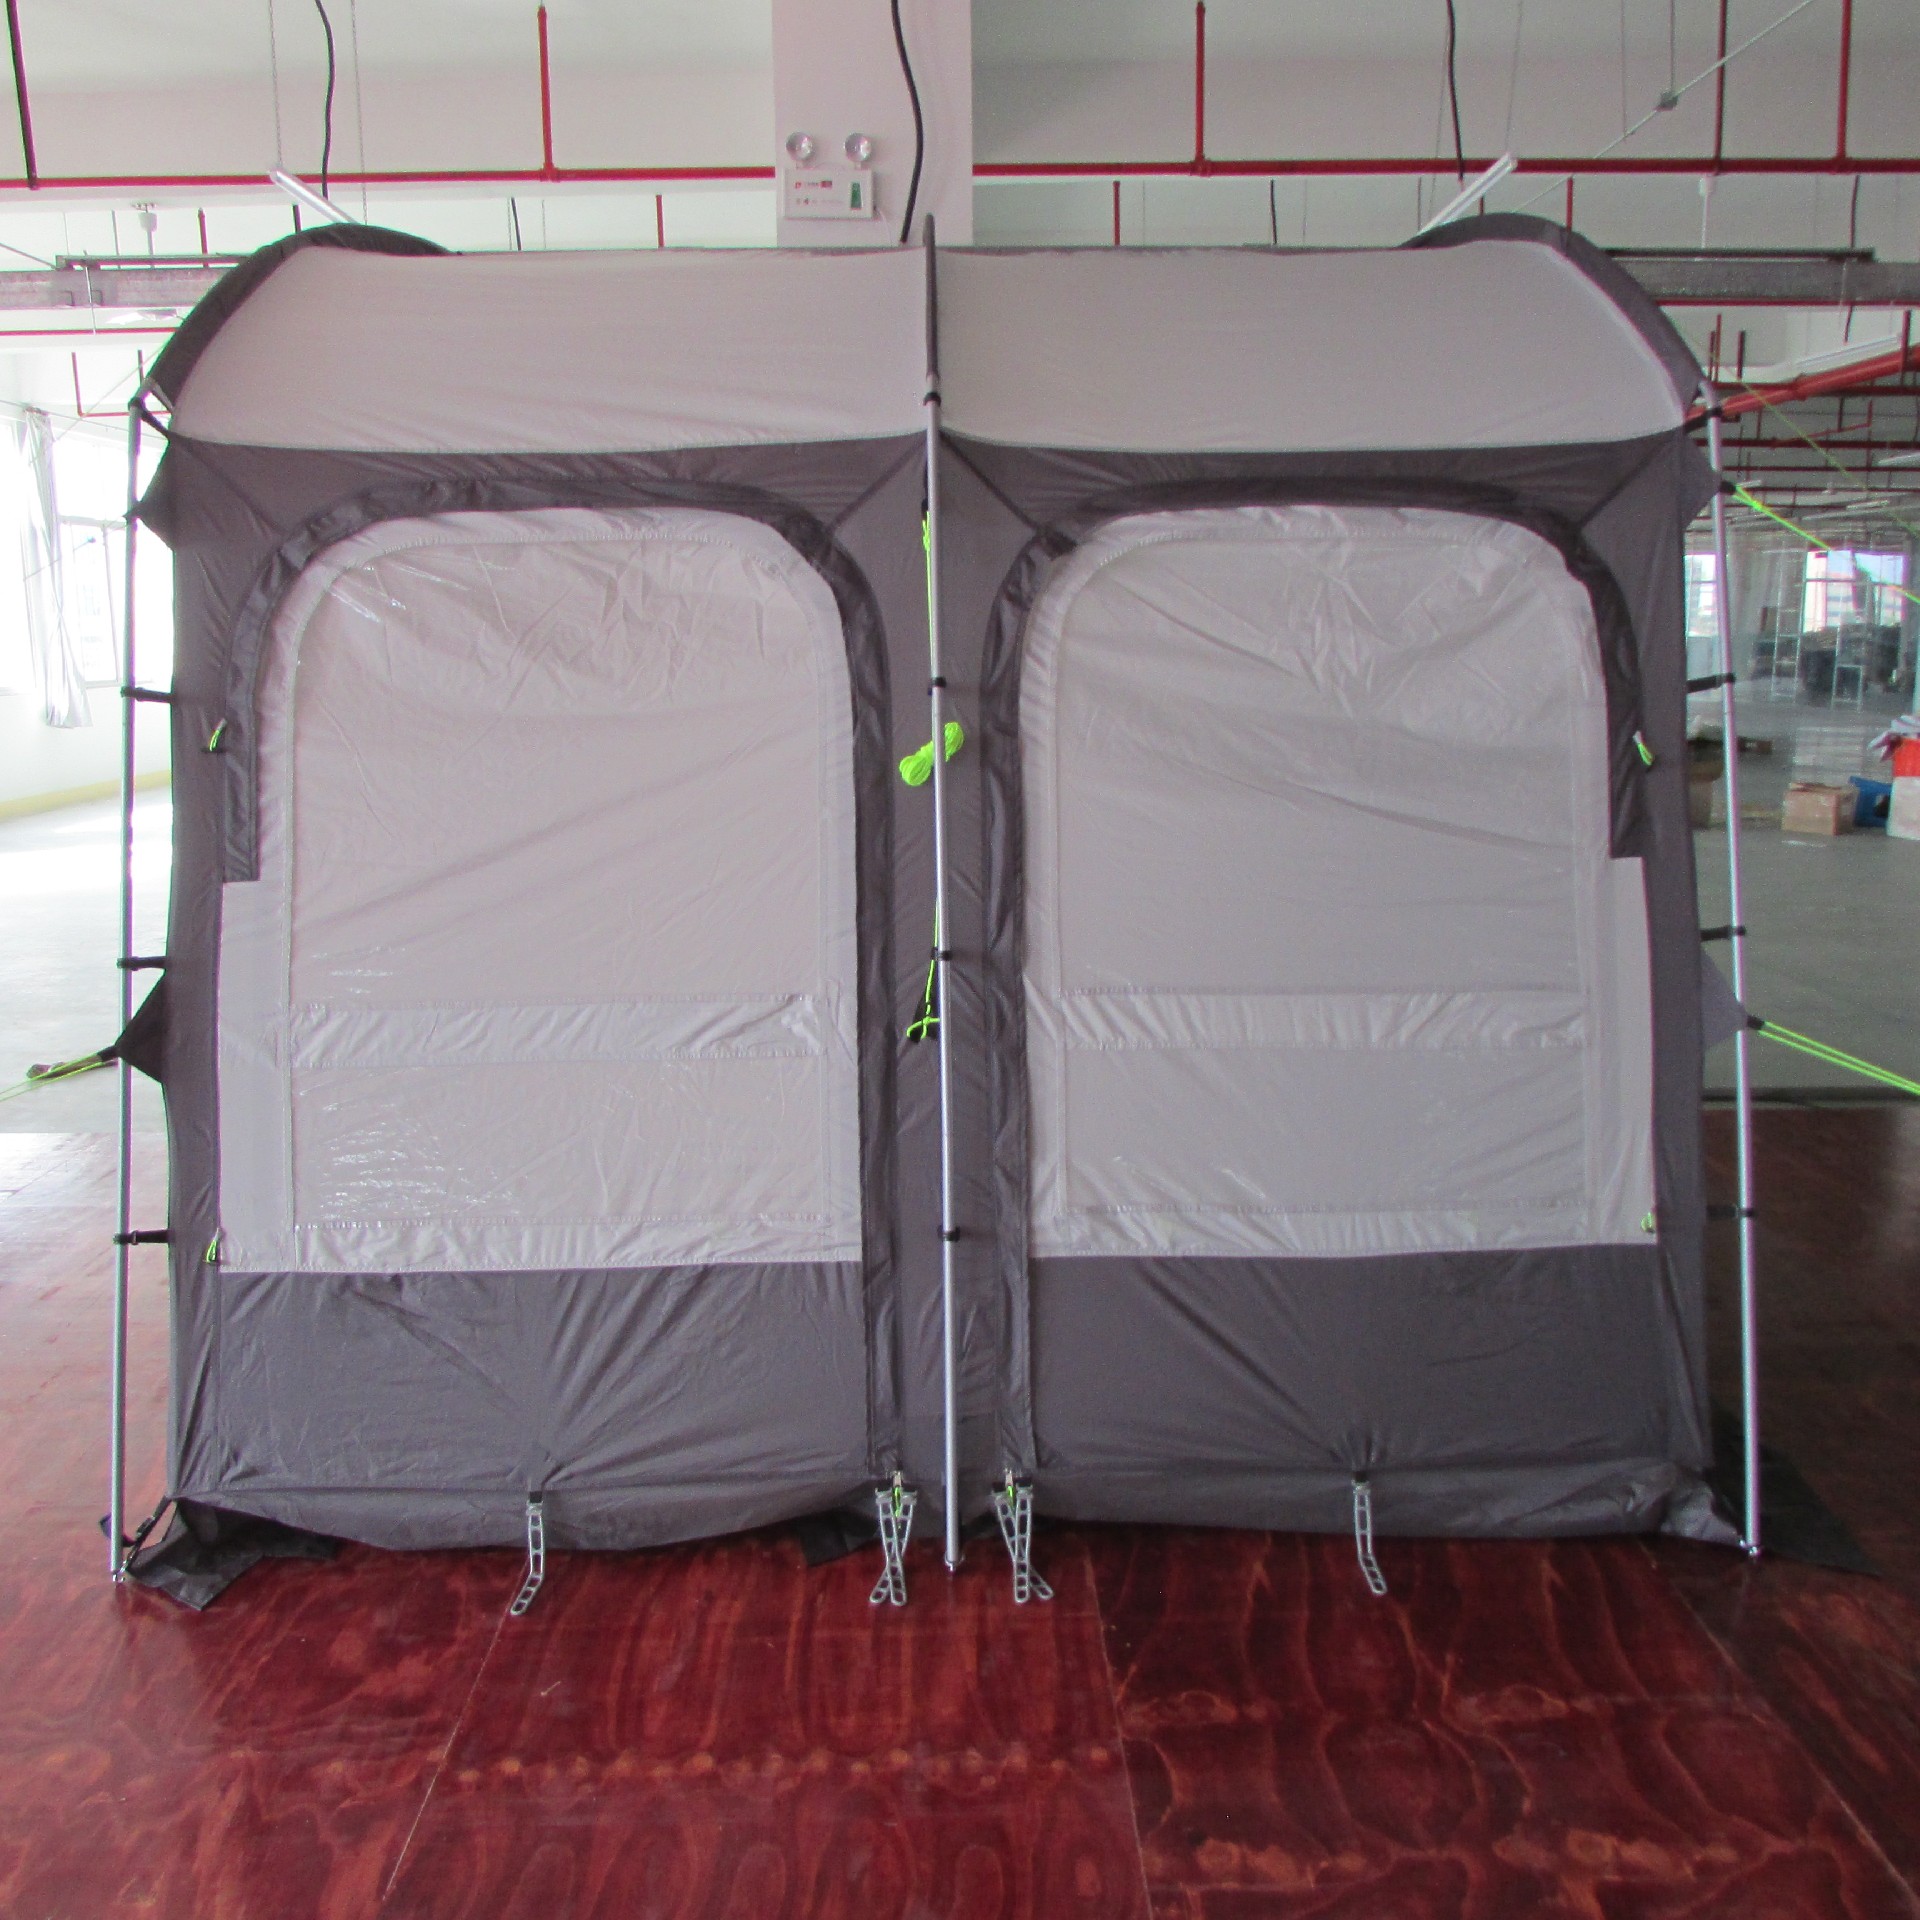 Drive away several style camping awning